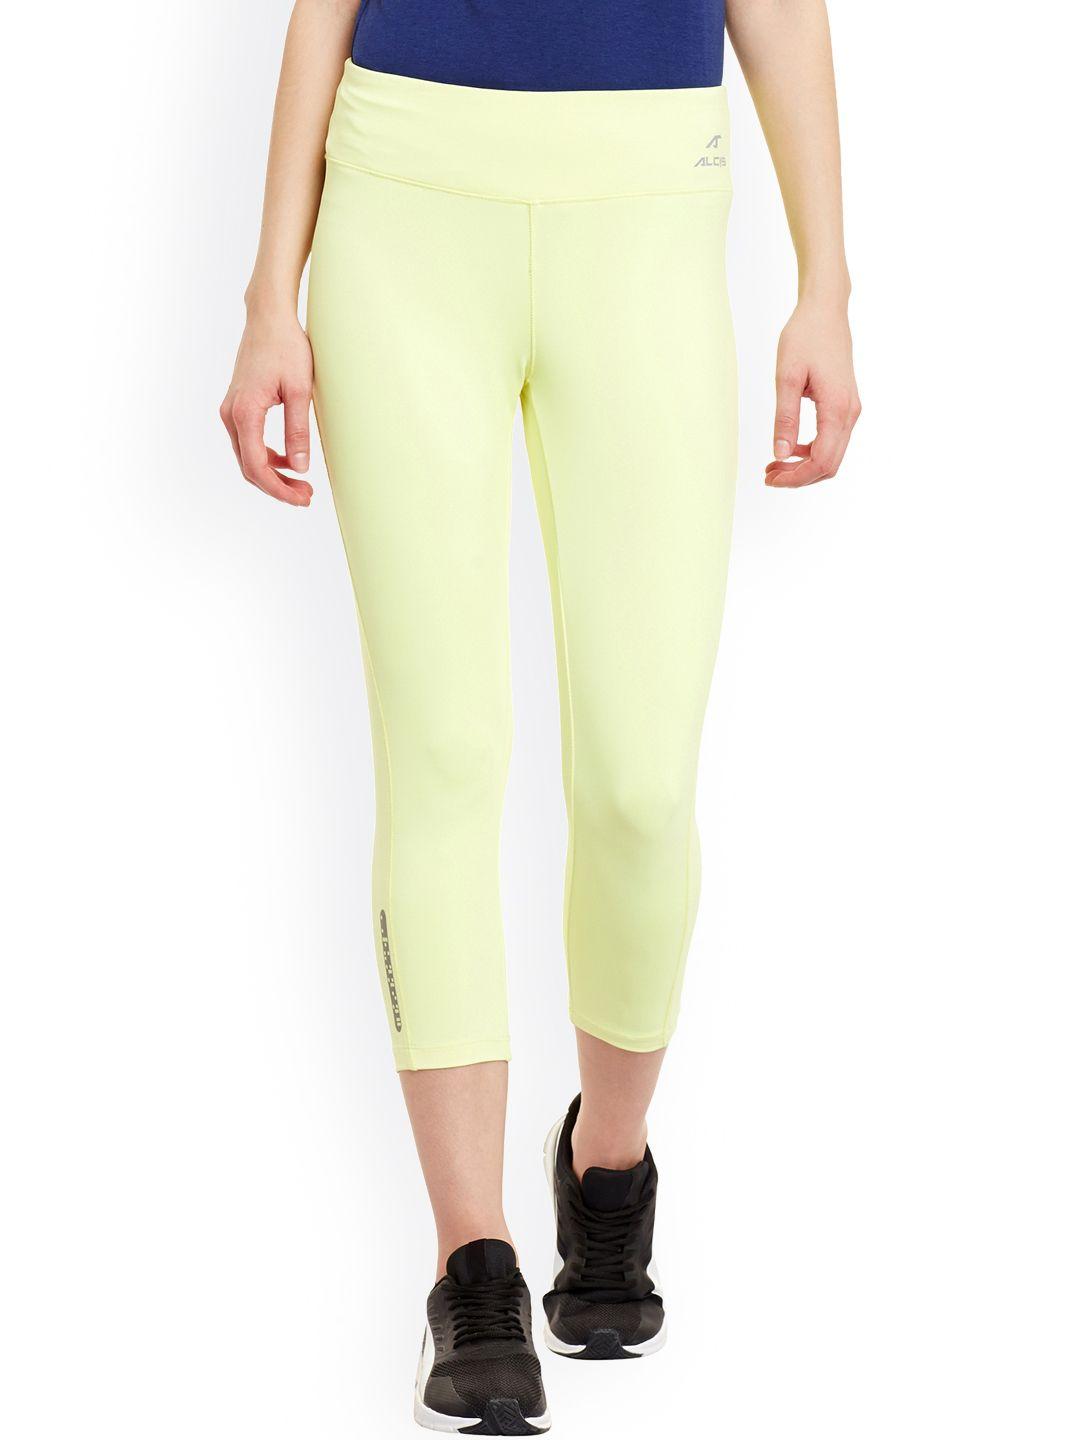 alcis yellow core fit tights